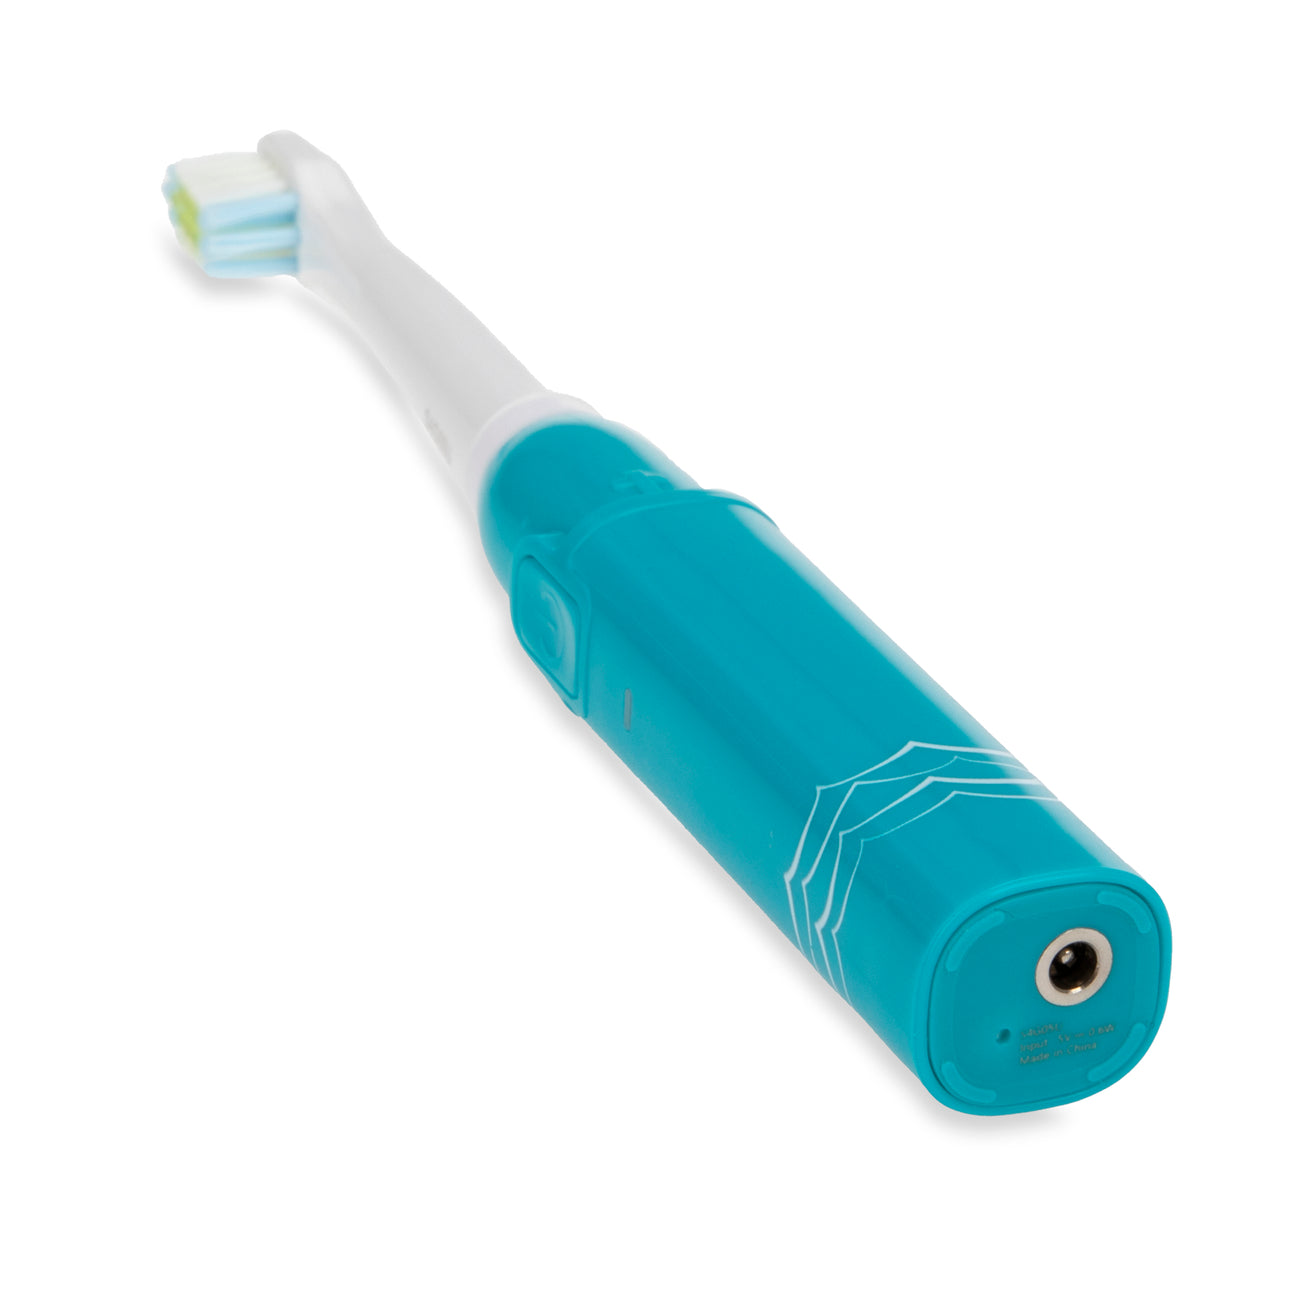 Sonic Toothbrush - Scuba Diver - Dr Talbot's US